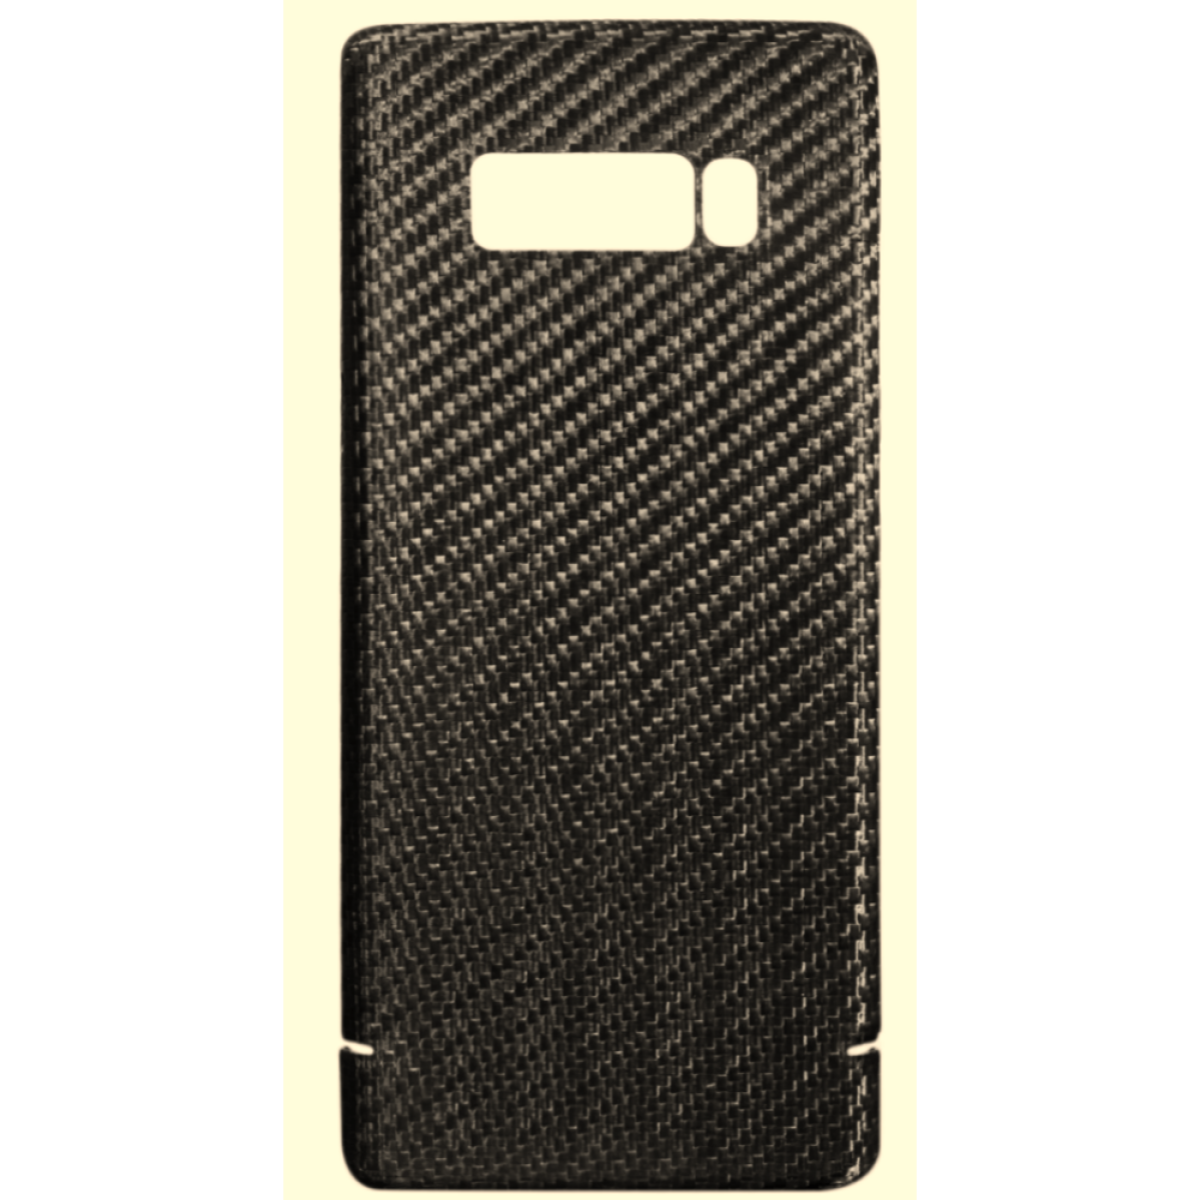 Note Cover Viversis Universal, 8, Carbon Full Cover, available Not Universal,